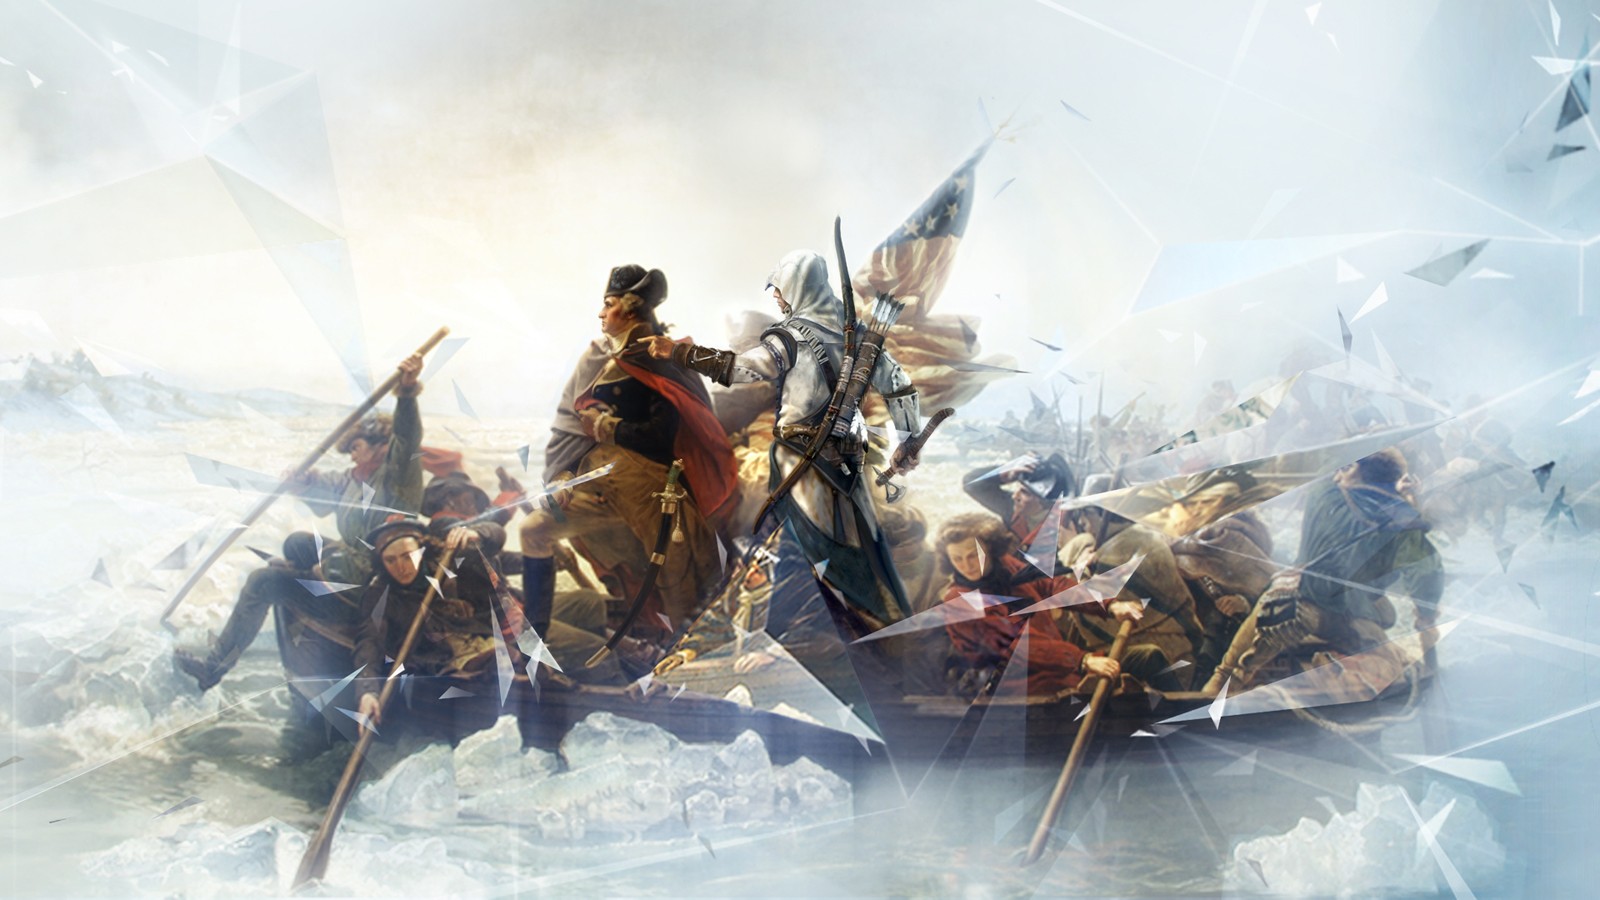 General 1600x900 Assassin's Creed video games Assassin's Creed III video game art